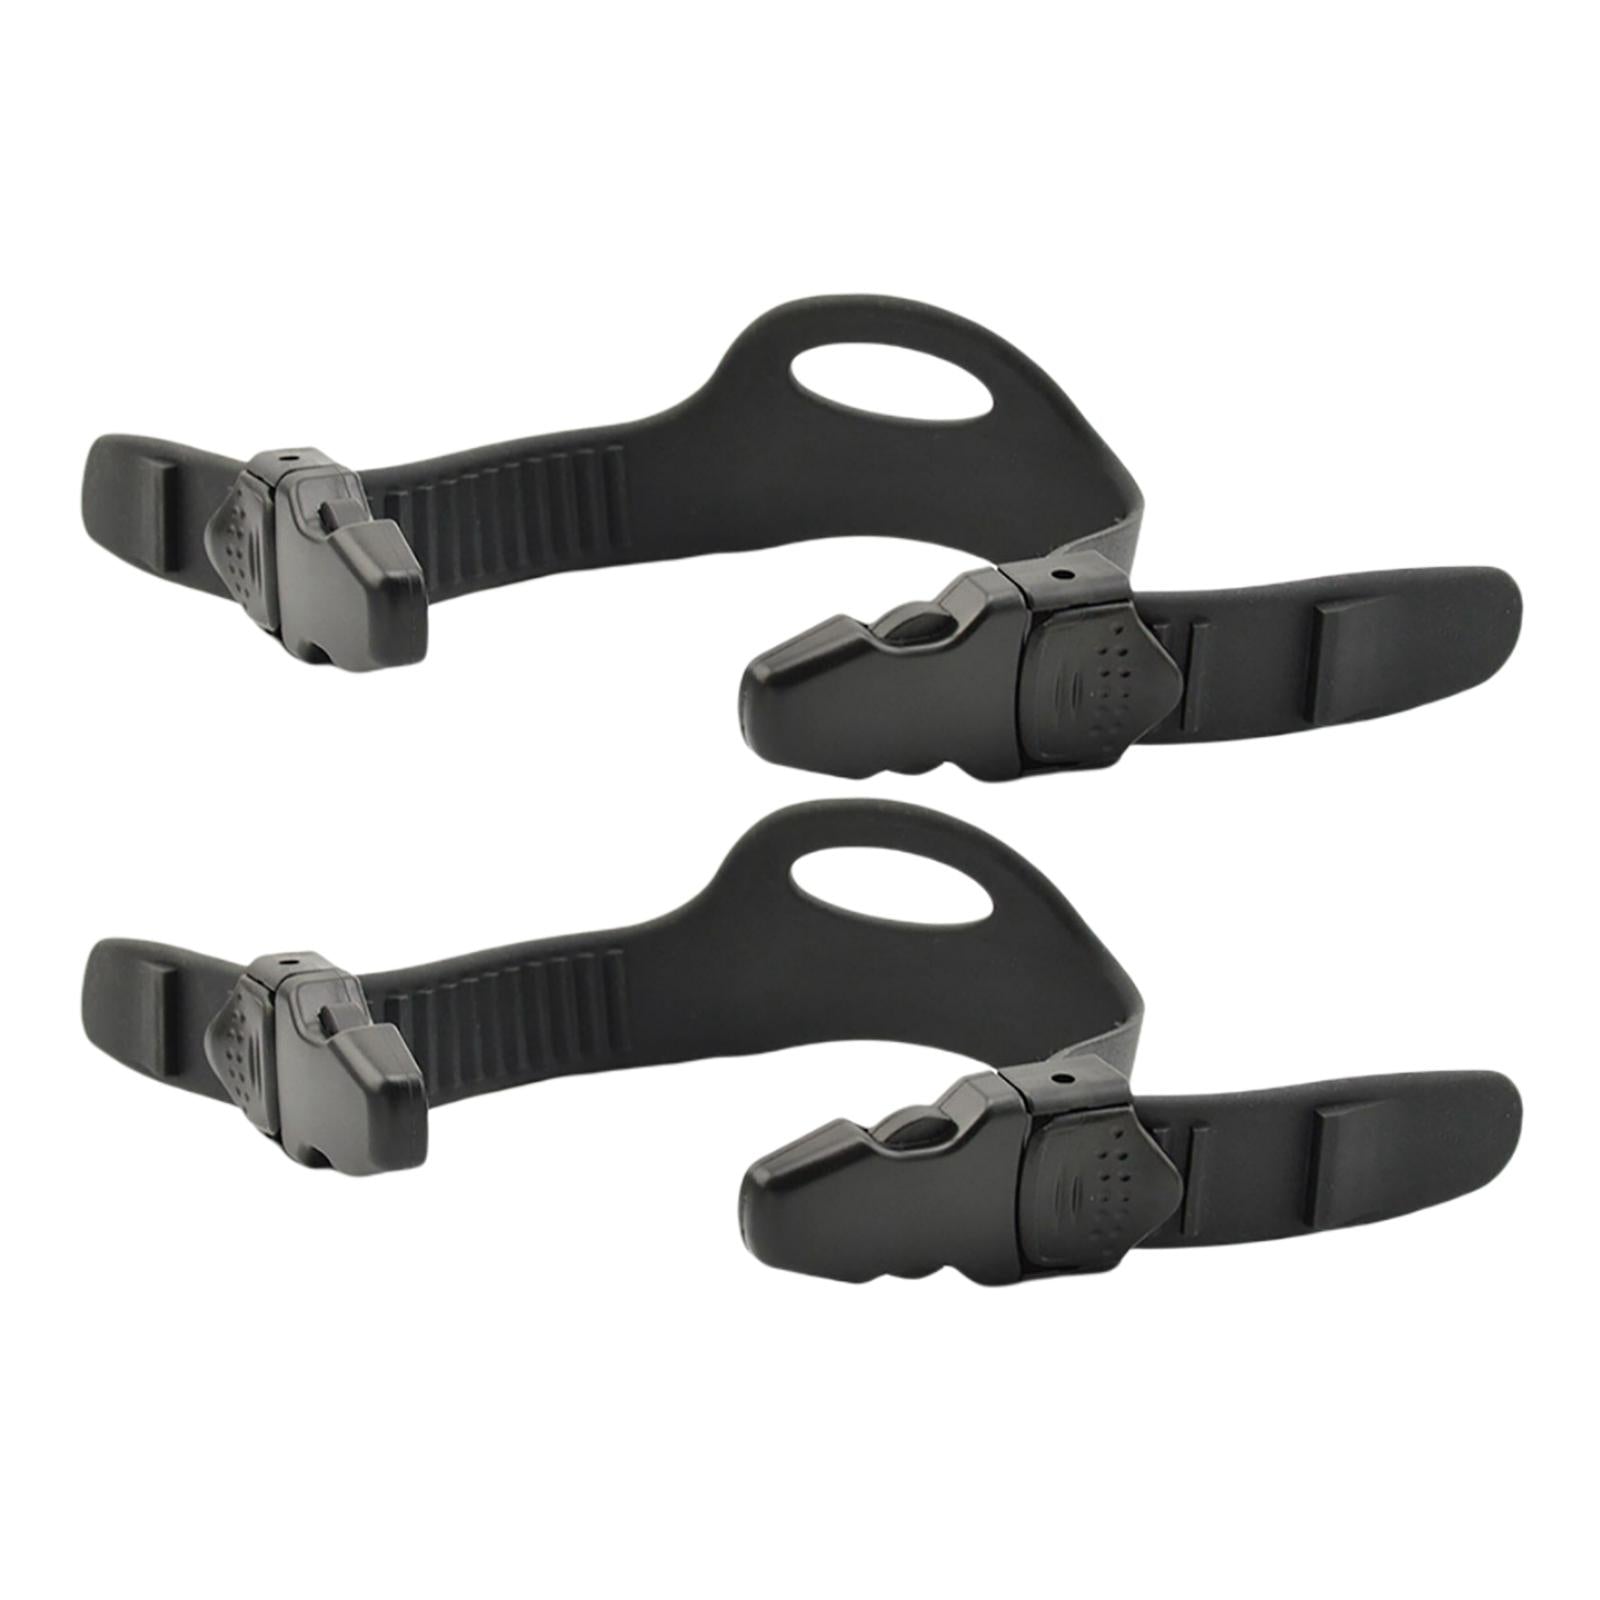 2 Pieces Diving Quick Release Fin Straps Adjustable Scuba with Buckles M